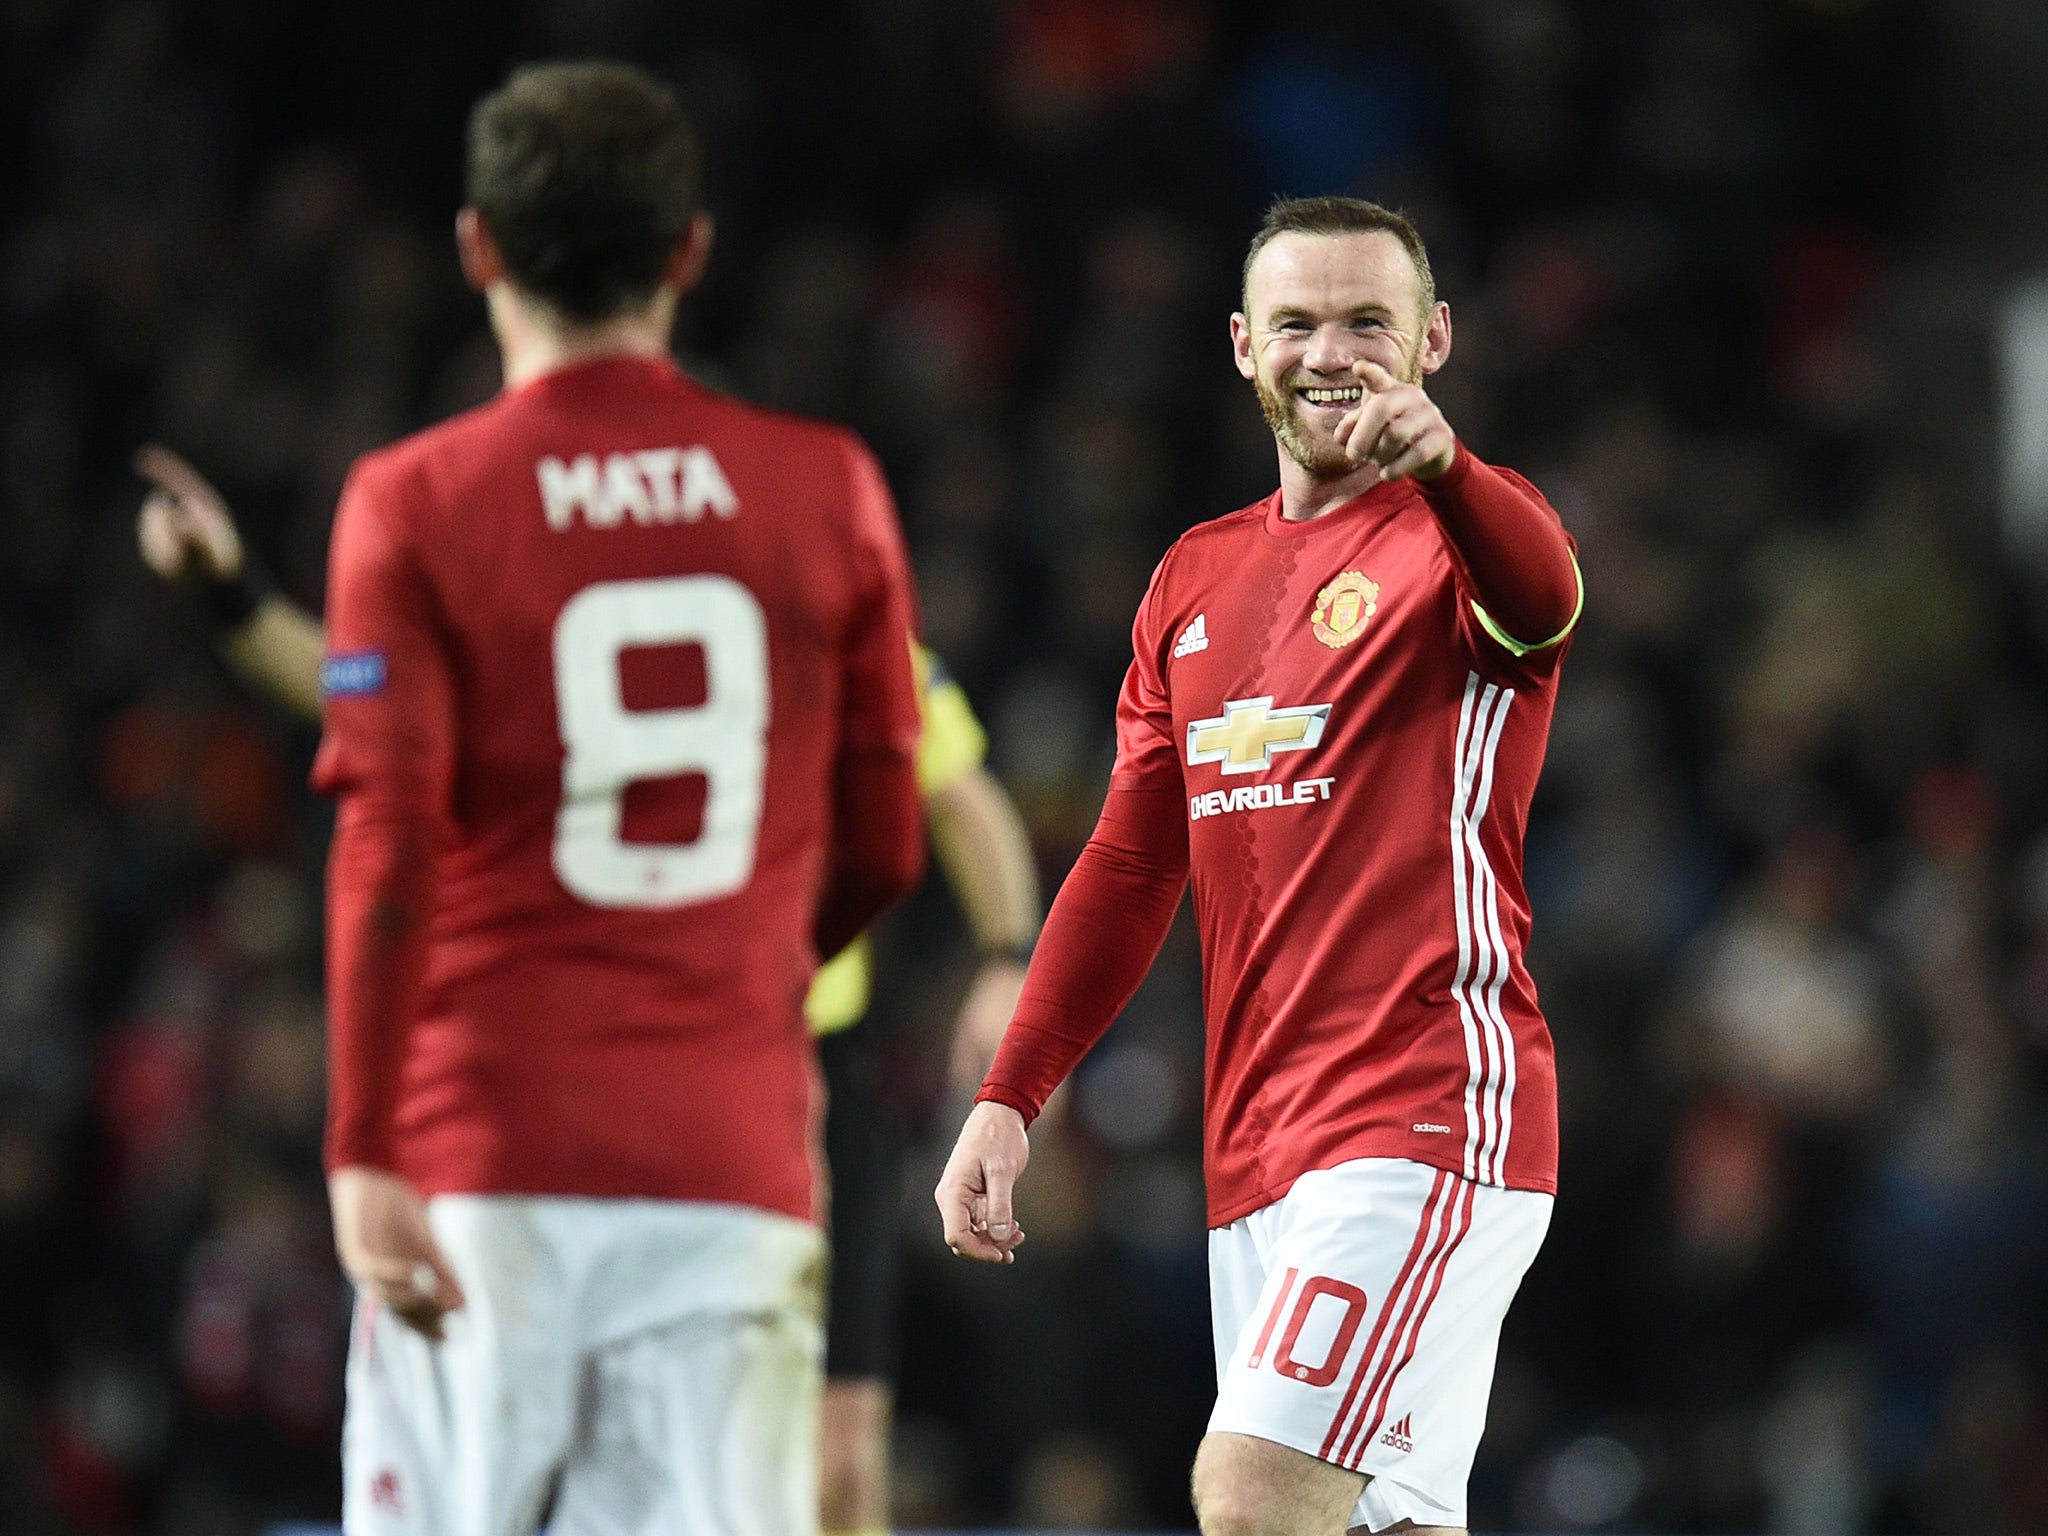 Rooney set up United's second with a delightful reverse pass to Mata